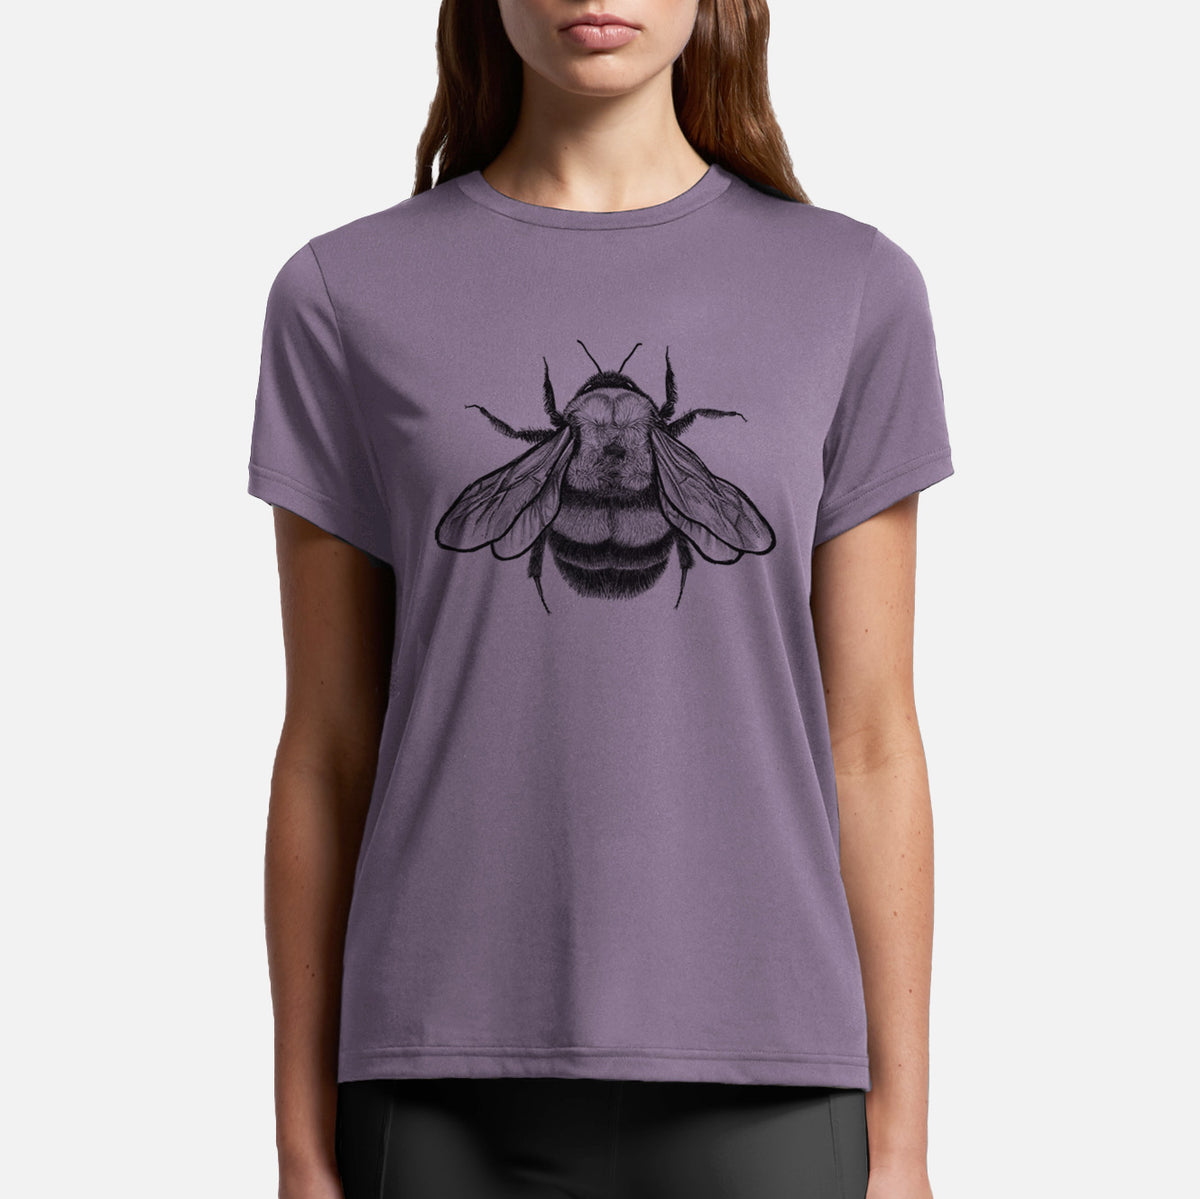 Bombus Affinis - Rusty-Patched Bumble Bee - Womens Everyday Maple Tee